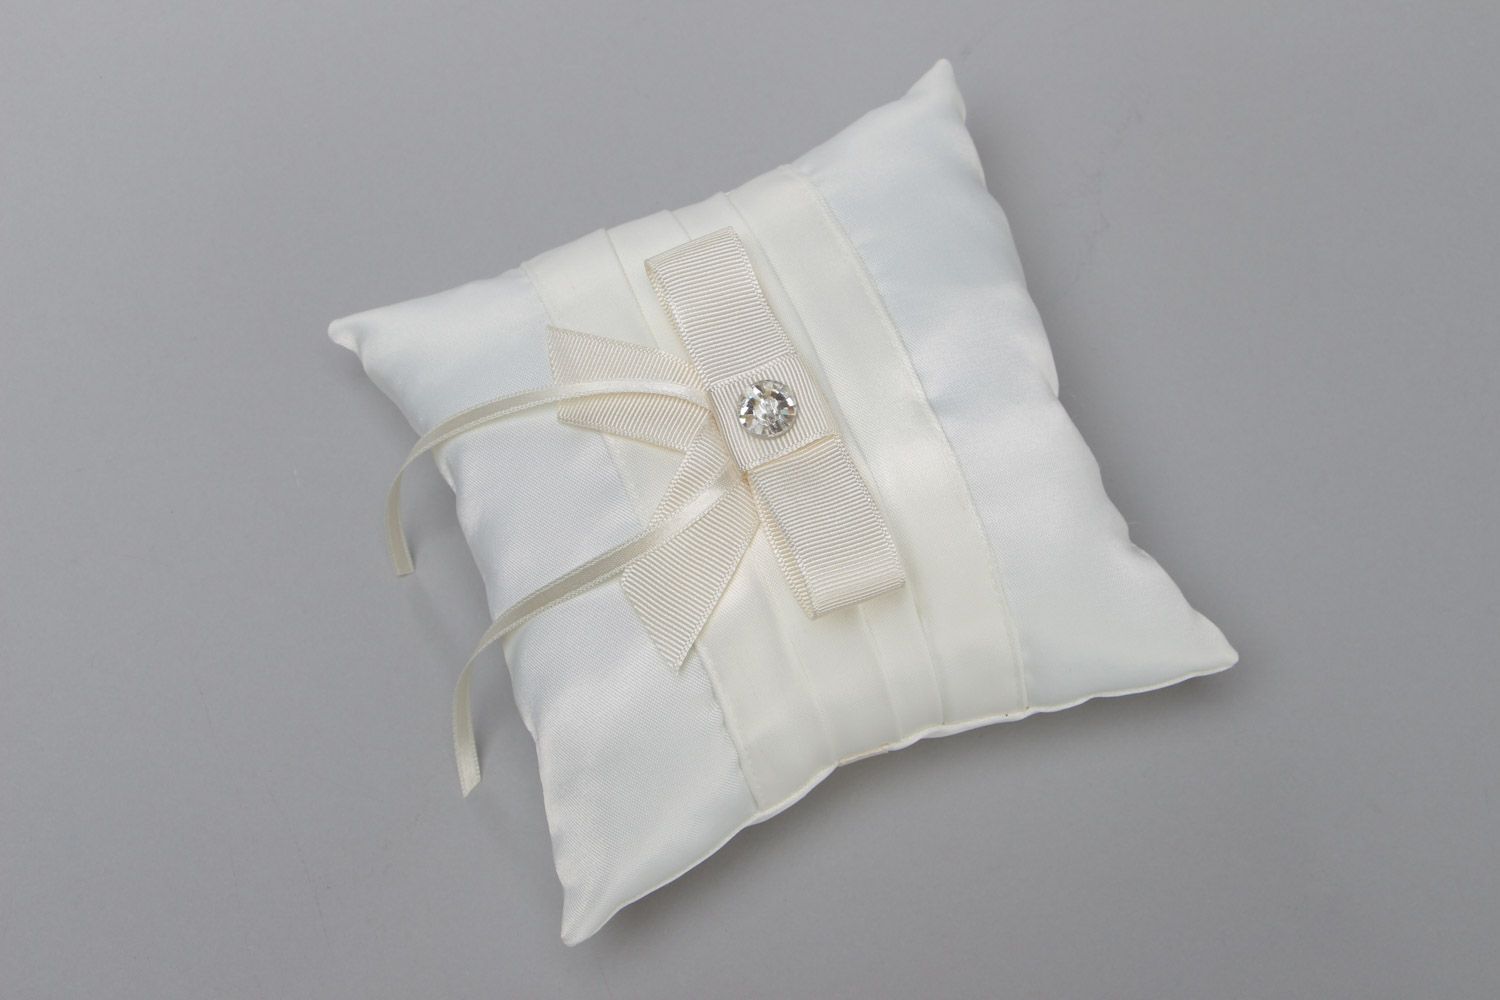 Tender handmade wedding ring pillow sewn of ivory-colored satin fabric with bow photo 2